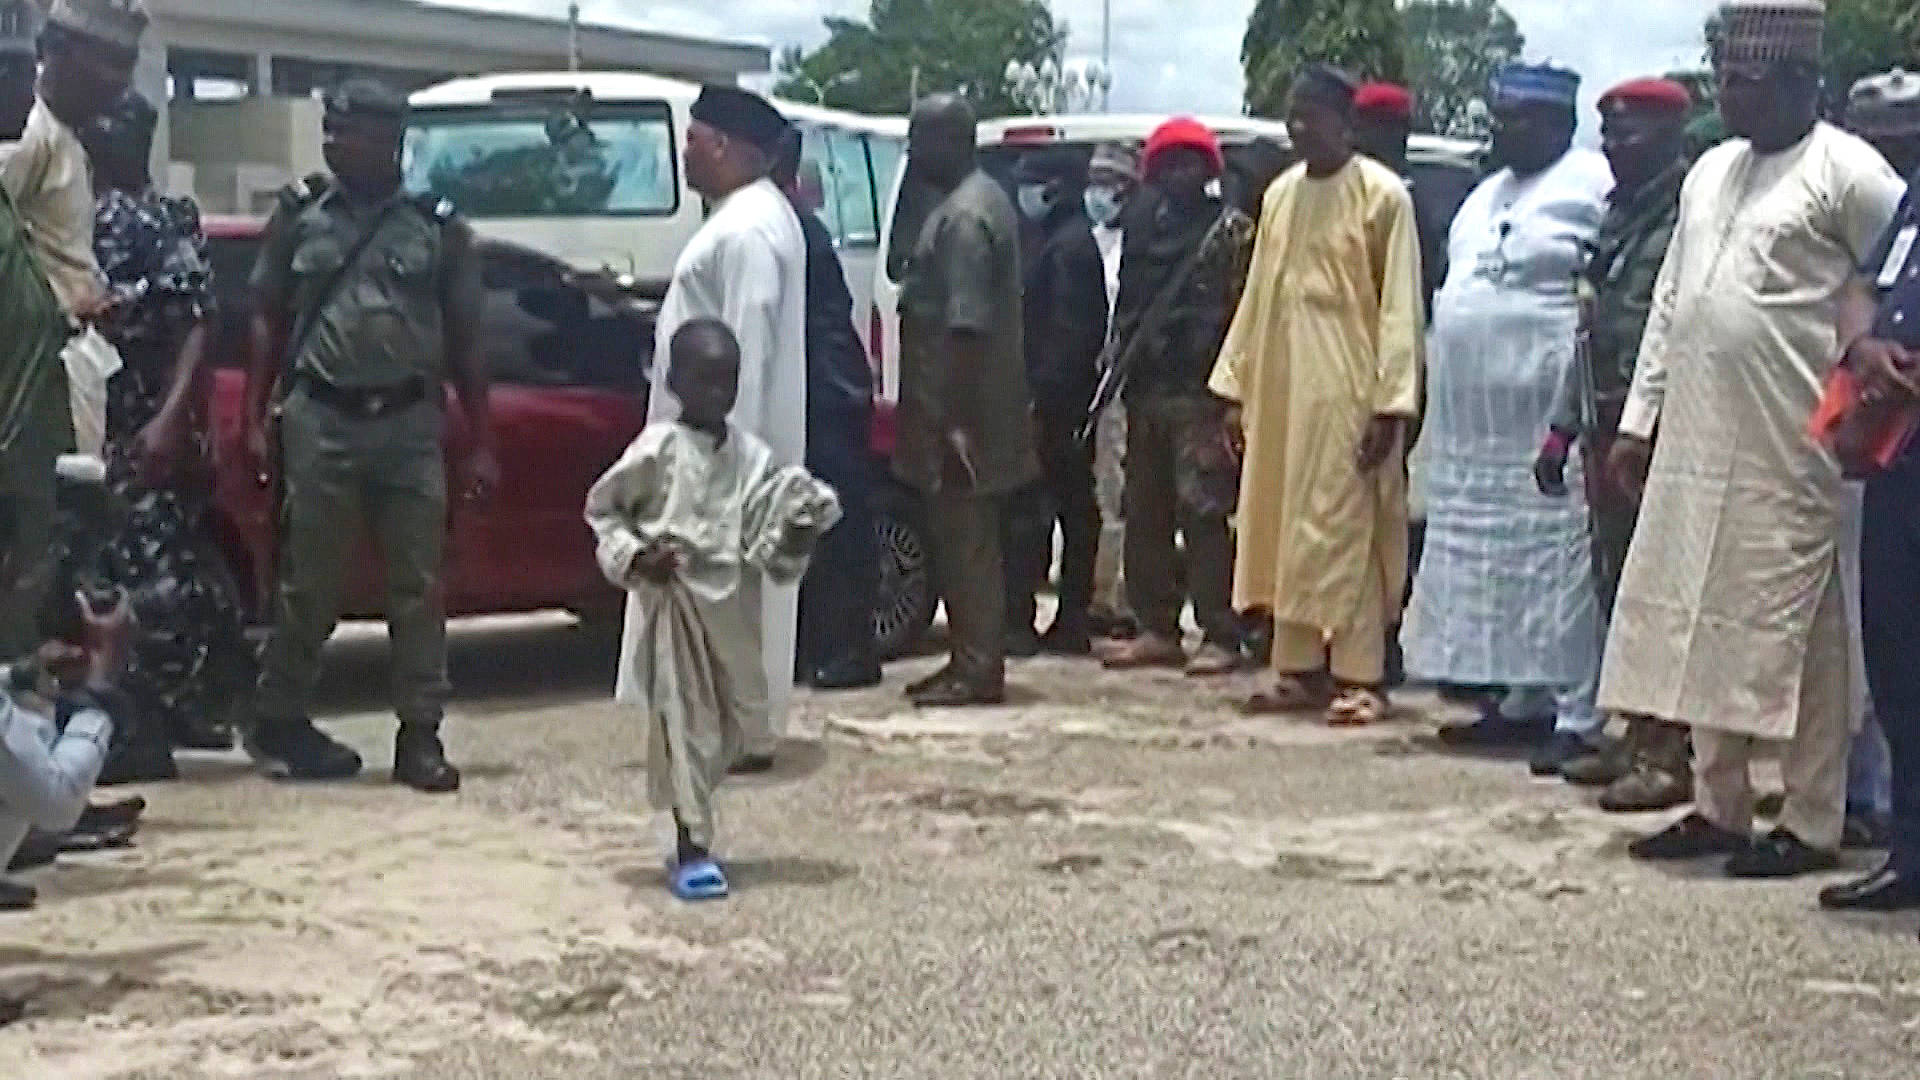 Kidnapped Nigerian Children Freed After Months in Captivity - Democracy Now!